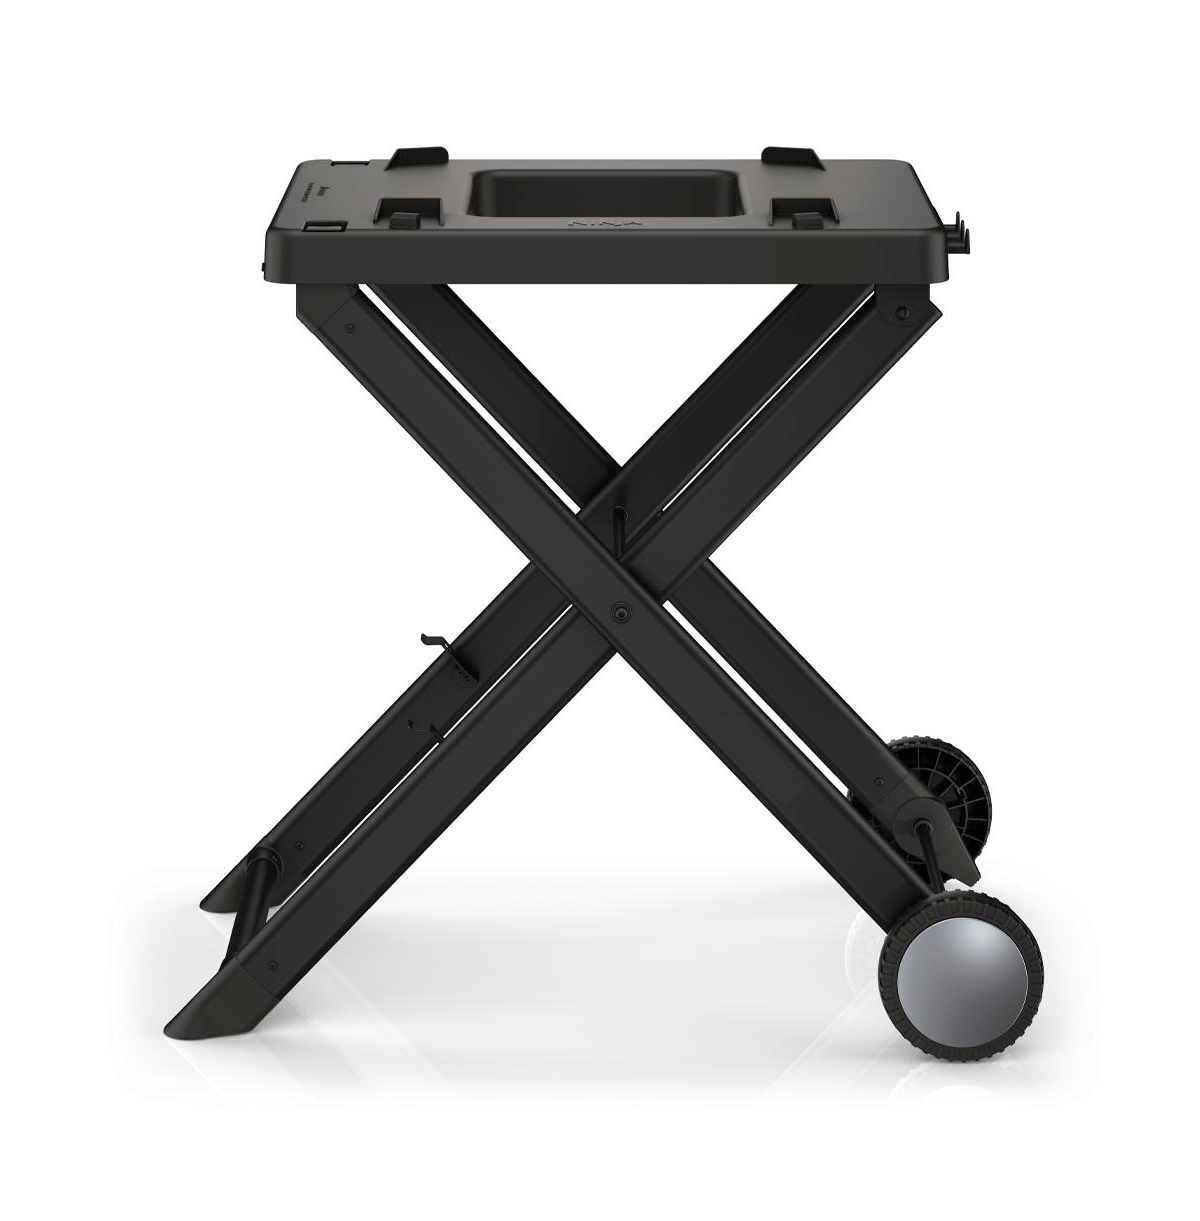 Wood Fire Collapsible Outdoor Grill Stand, Made for Ninja Wood Fire Grills, Xskstand - Black